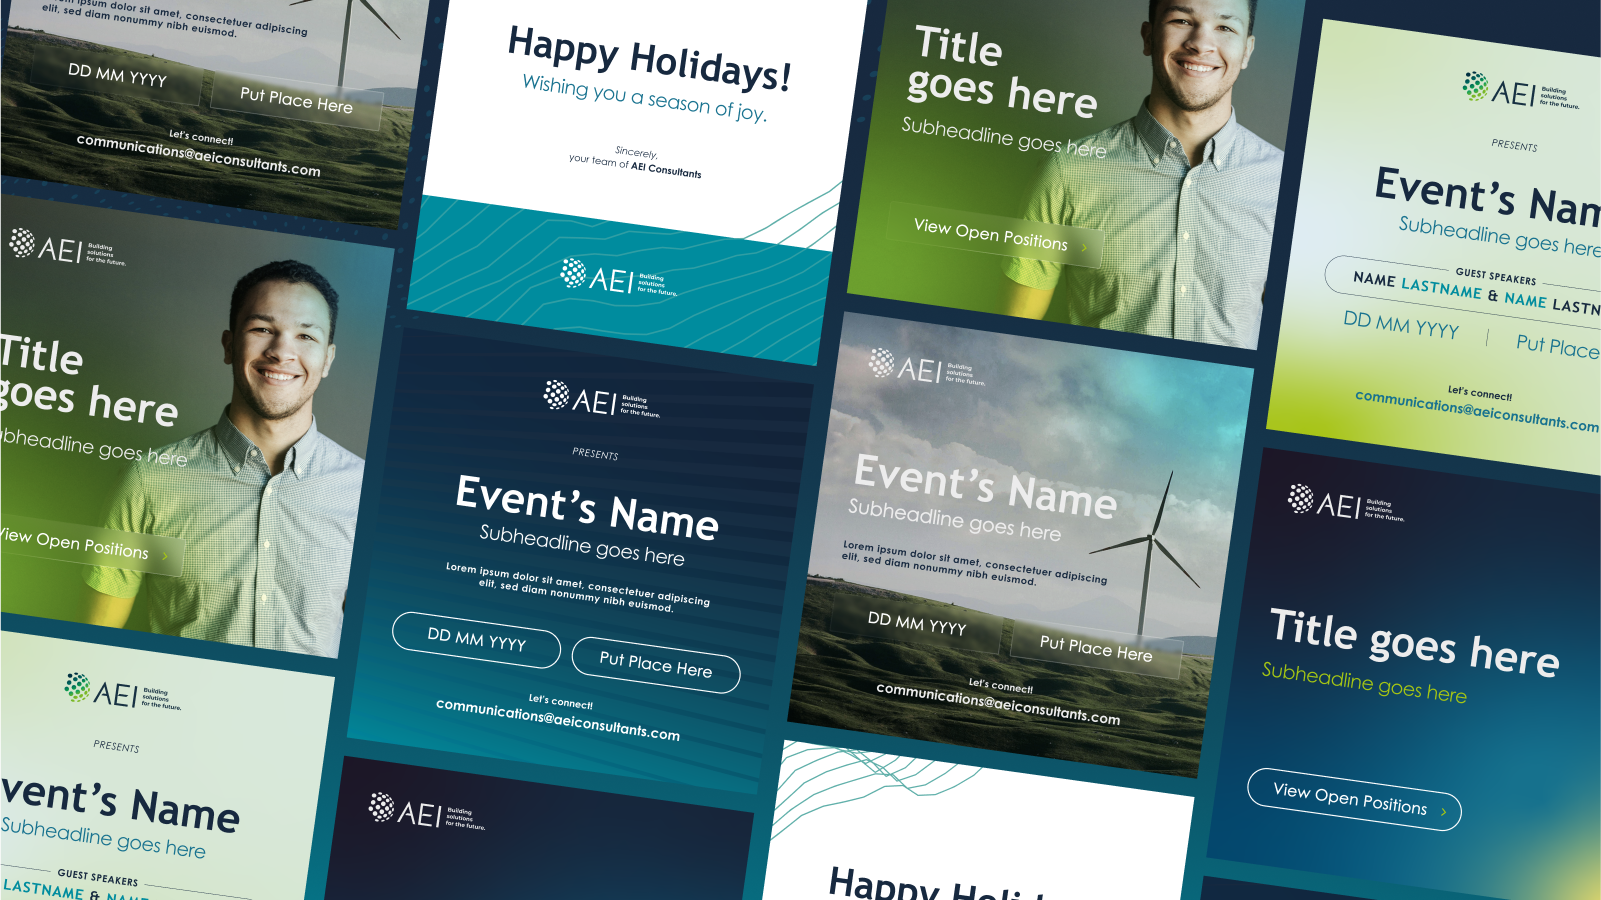 Mockups of AEI ad templates by Superside